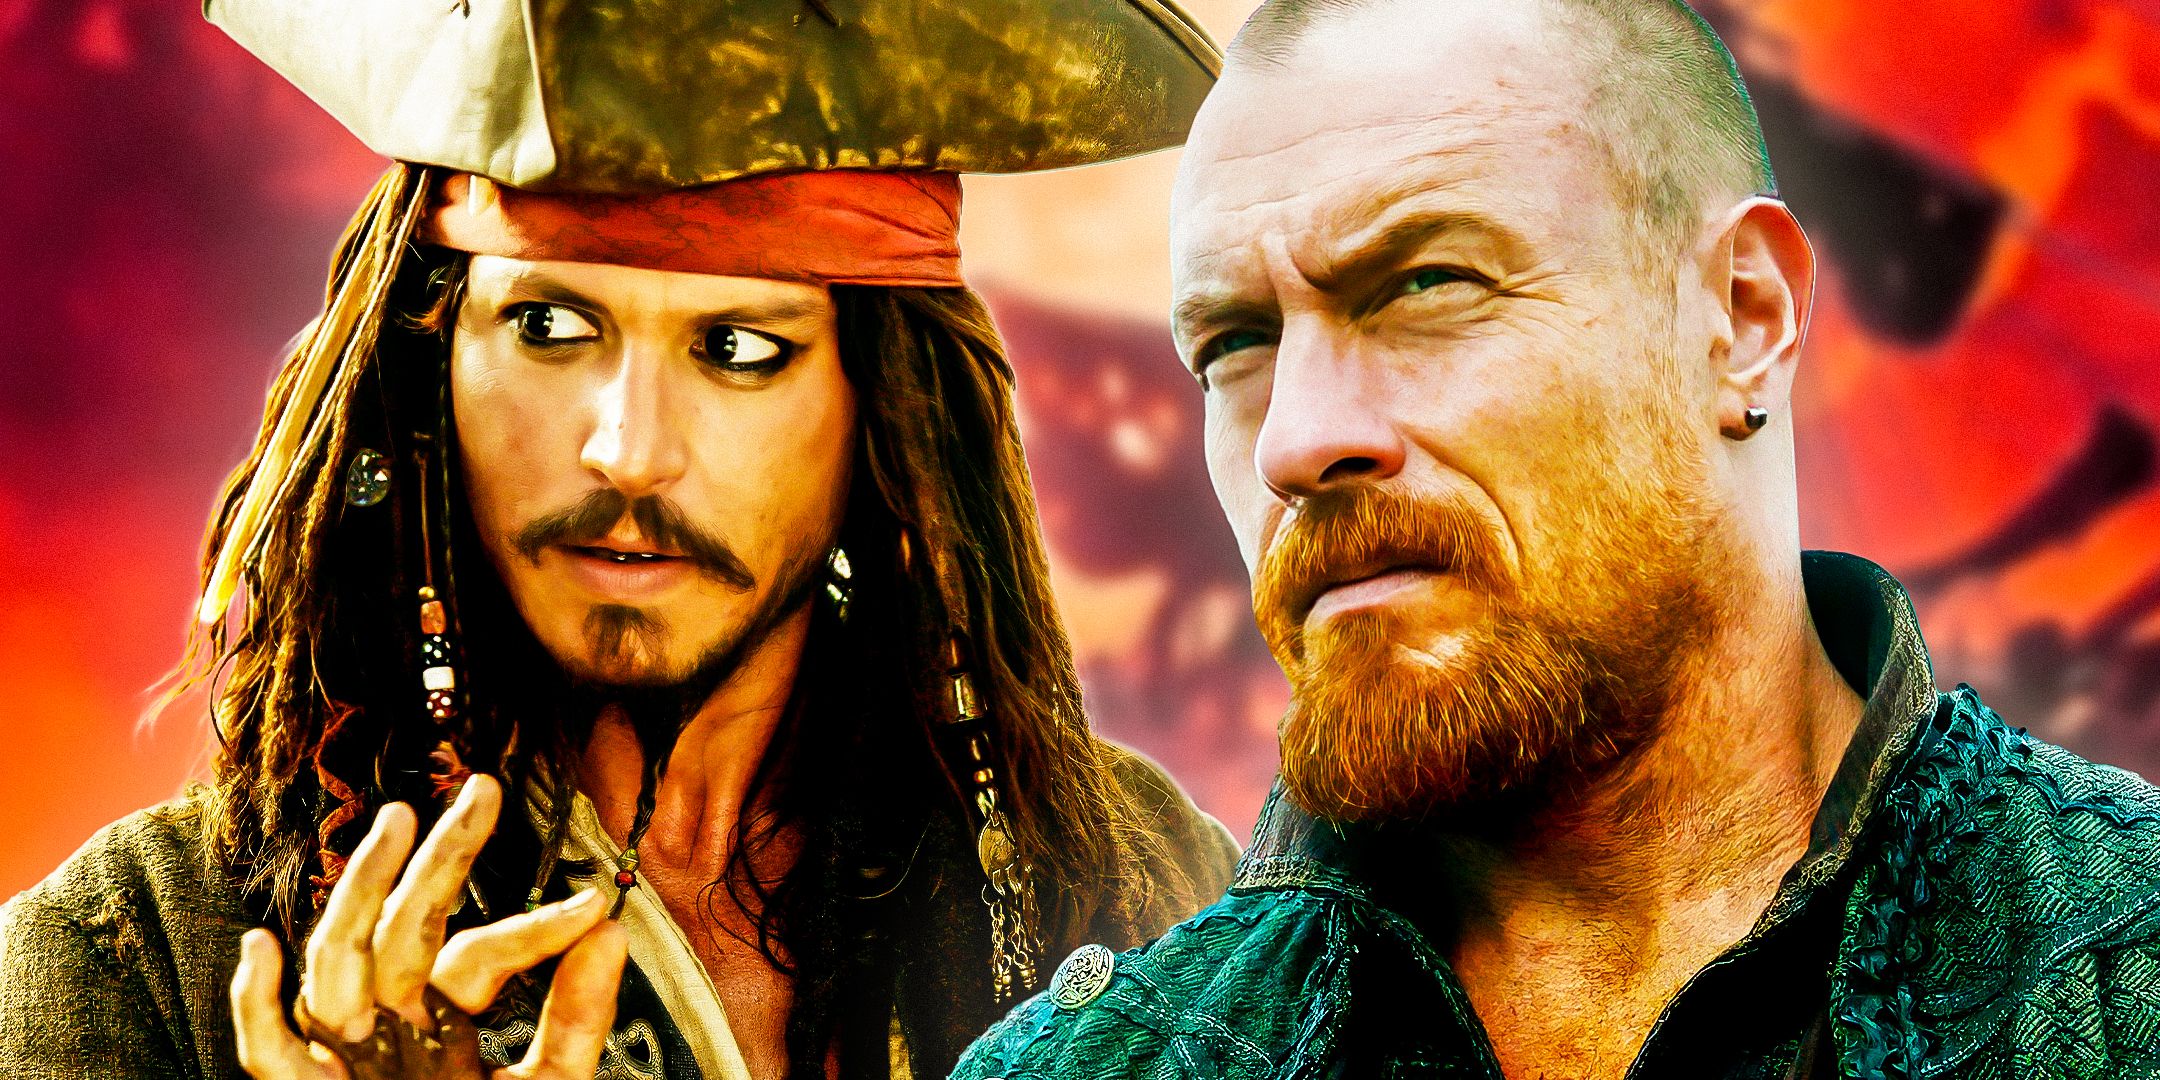 Johnny-Depp-----as-Jack-Sparrow-from-Pirates-of-the-Caribbean-Movies-and-Toby-Stephens-as-Captain-Flint-from-Black-Sails